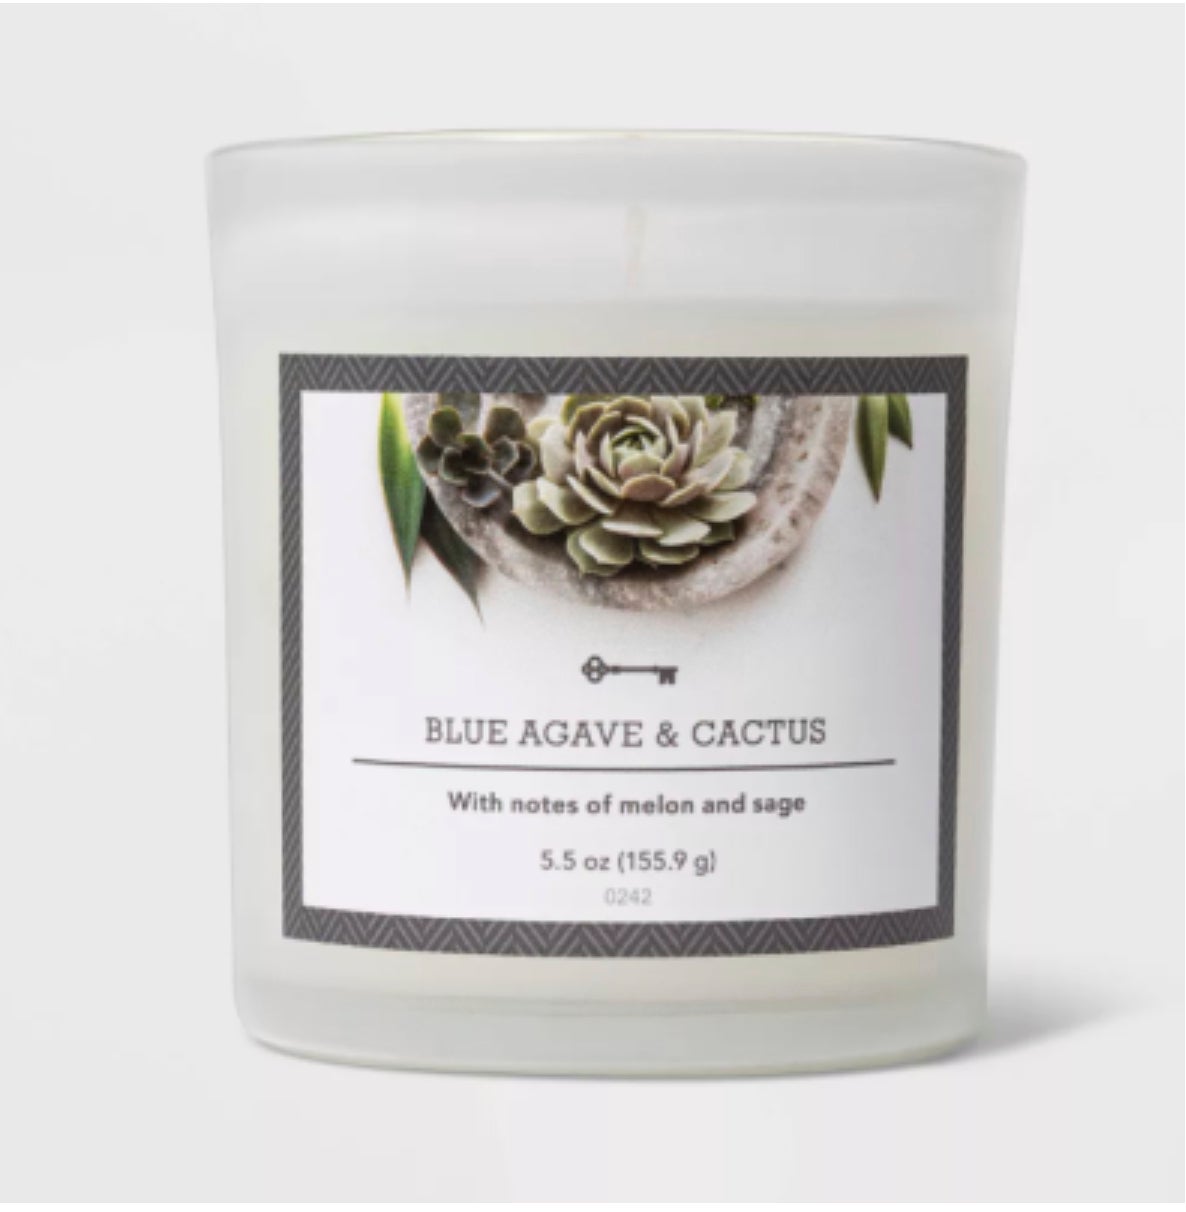 A blue agave & cactus candle that was recalled by Target is pictured.